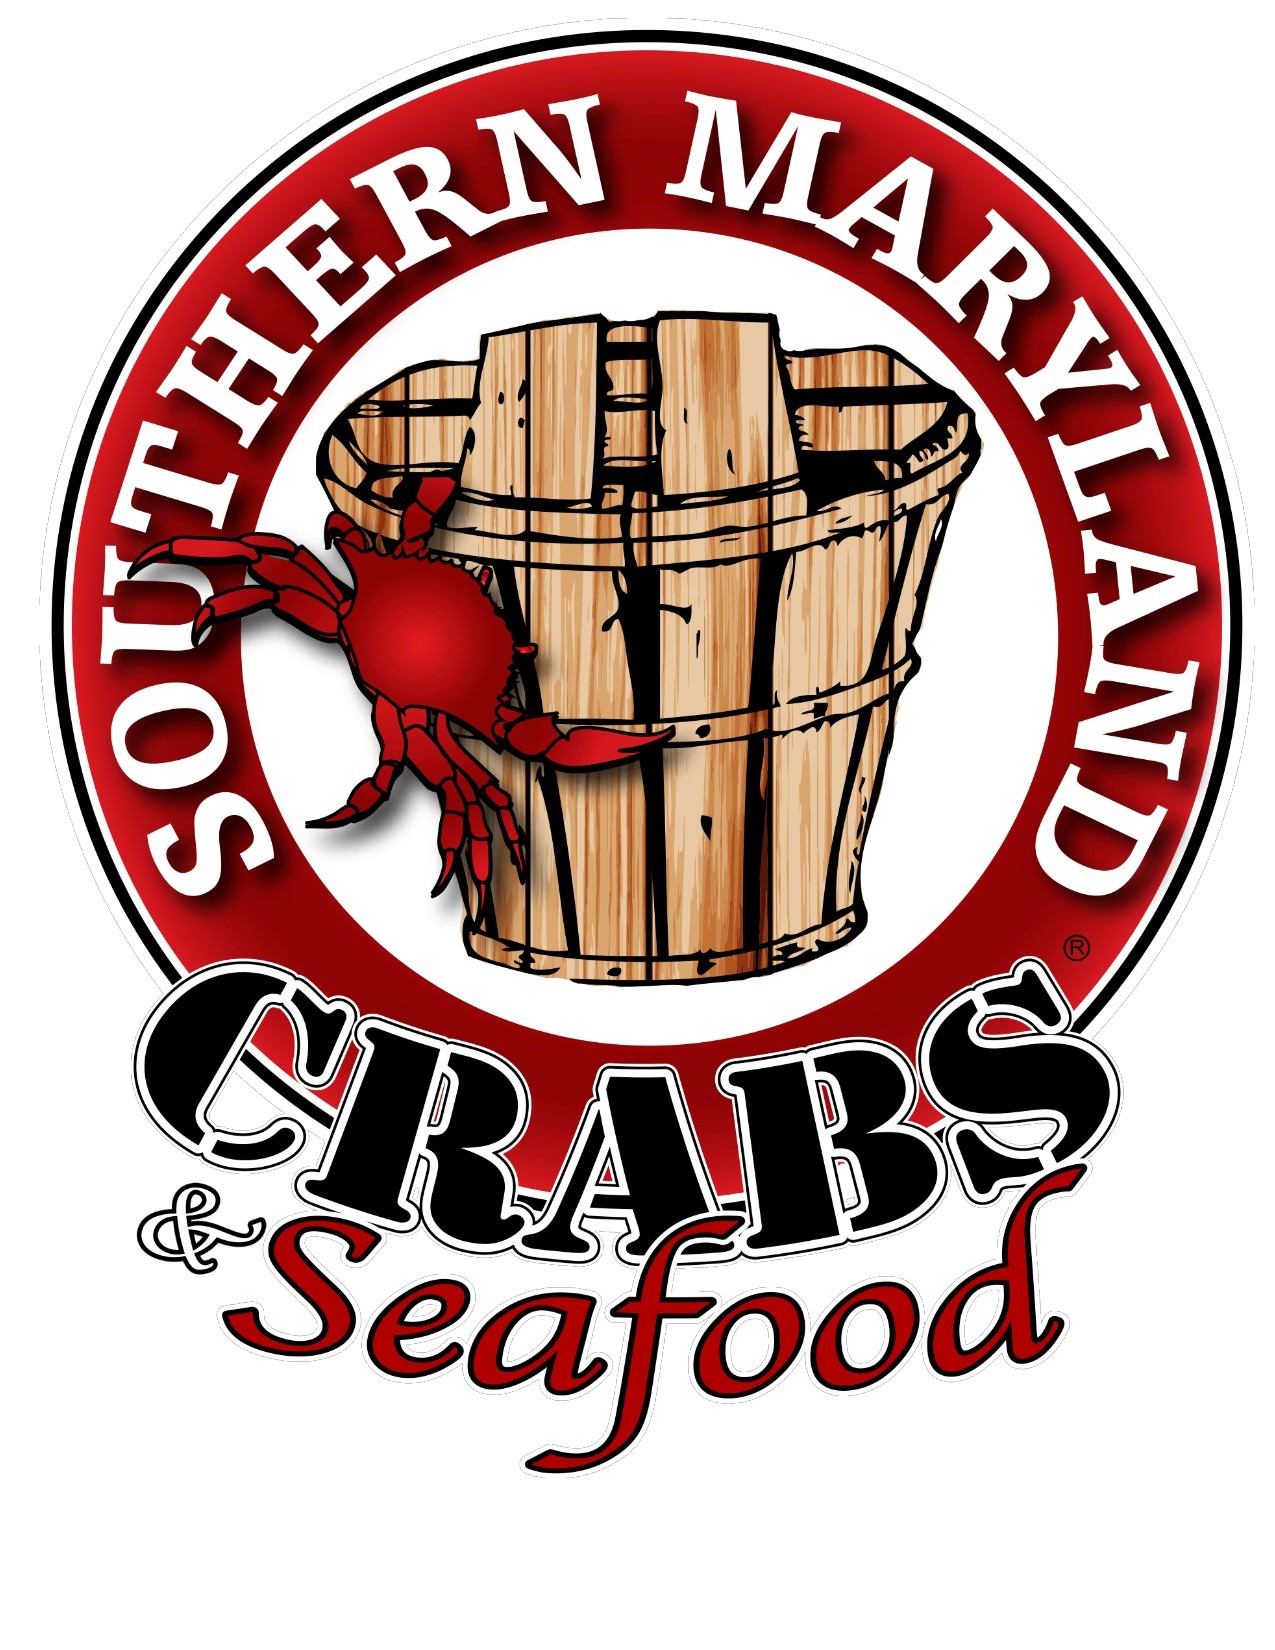 Southern Maryland Crabs and Seafood